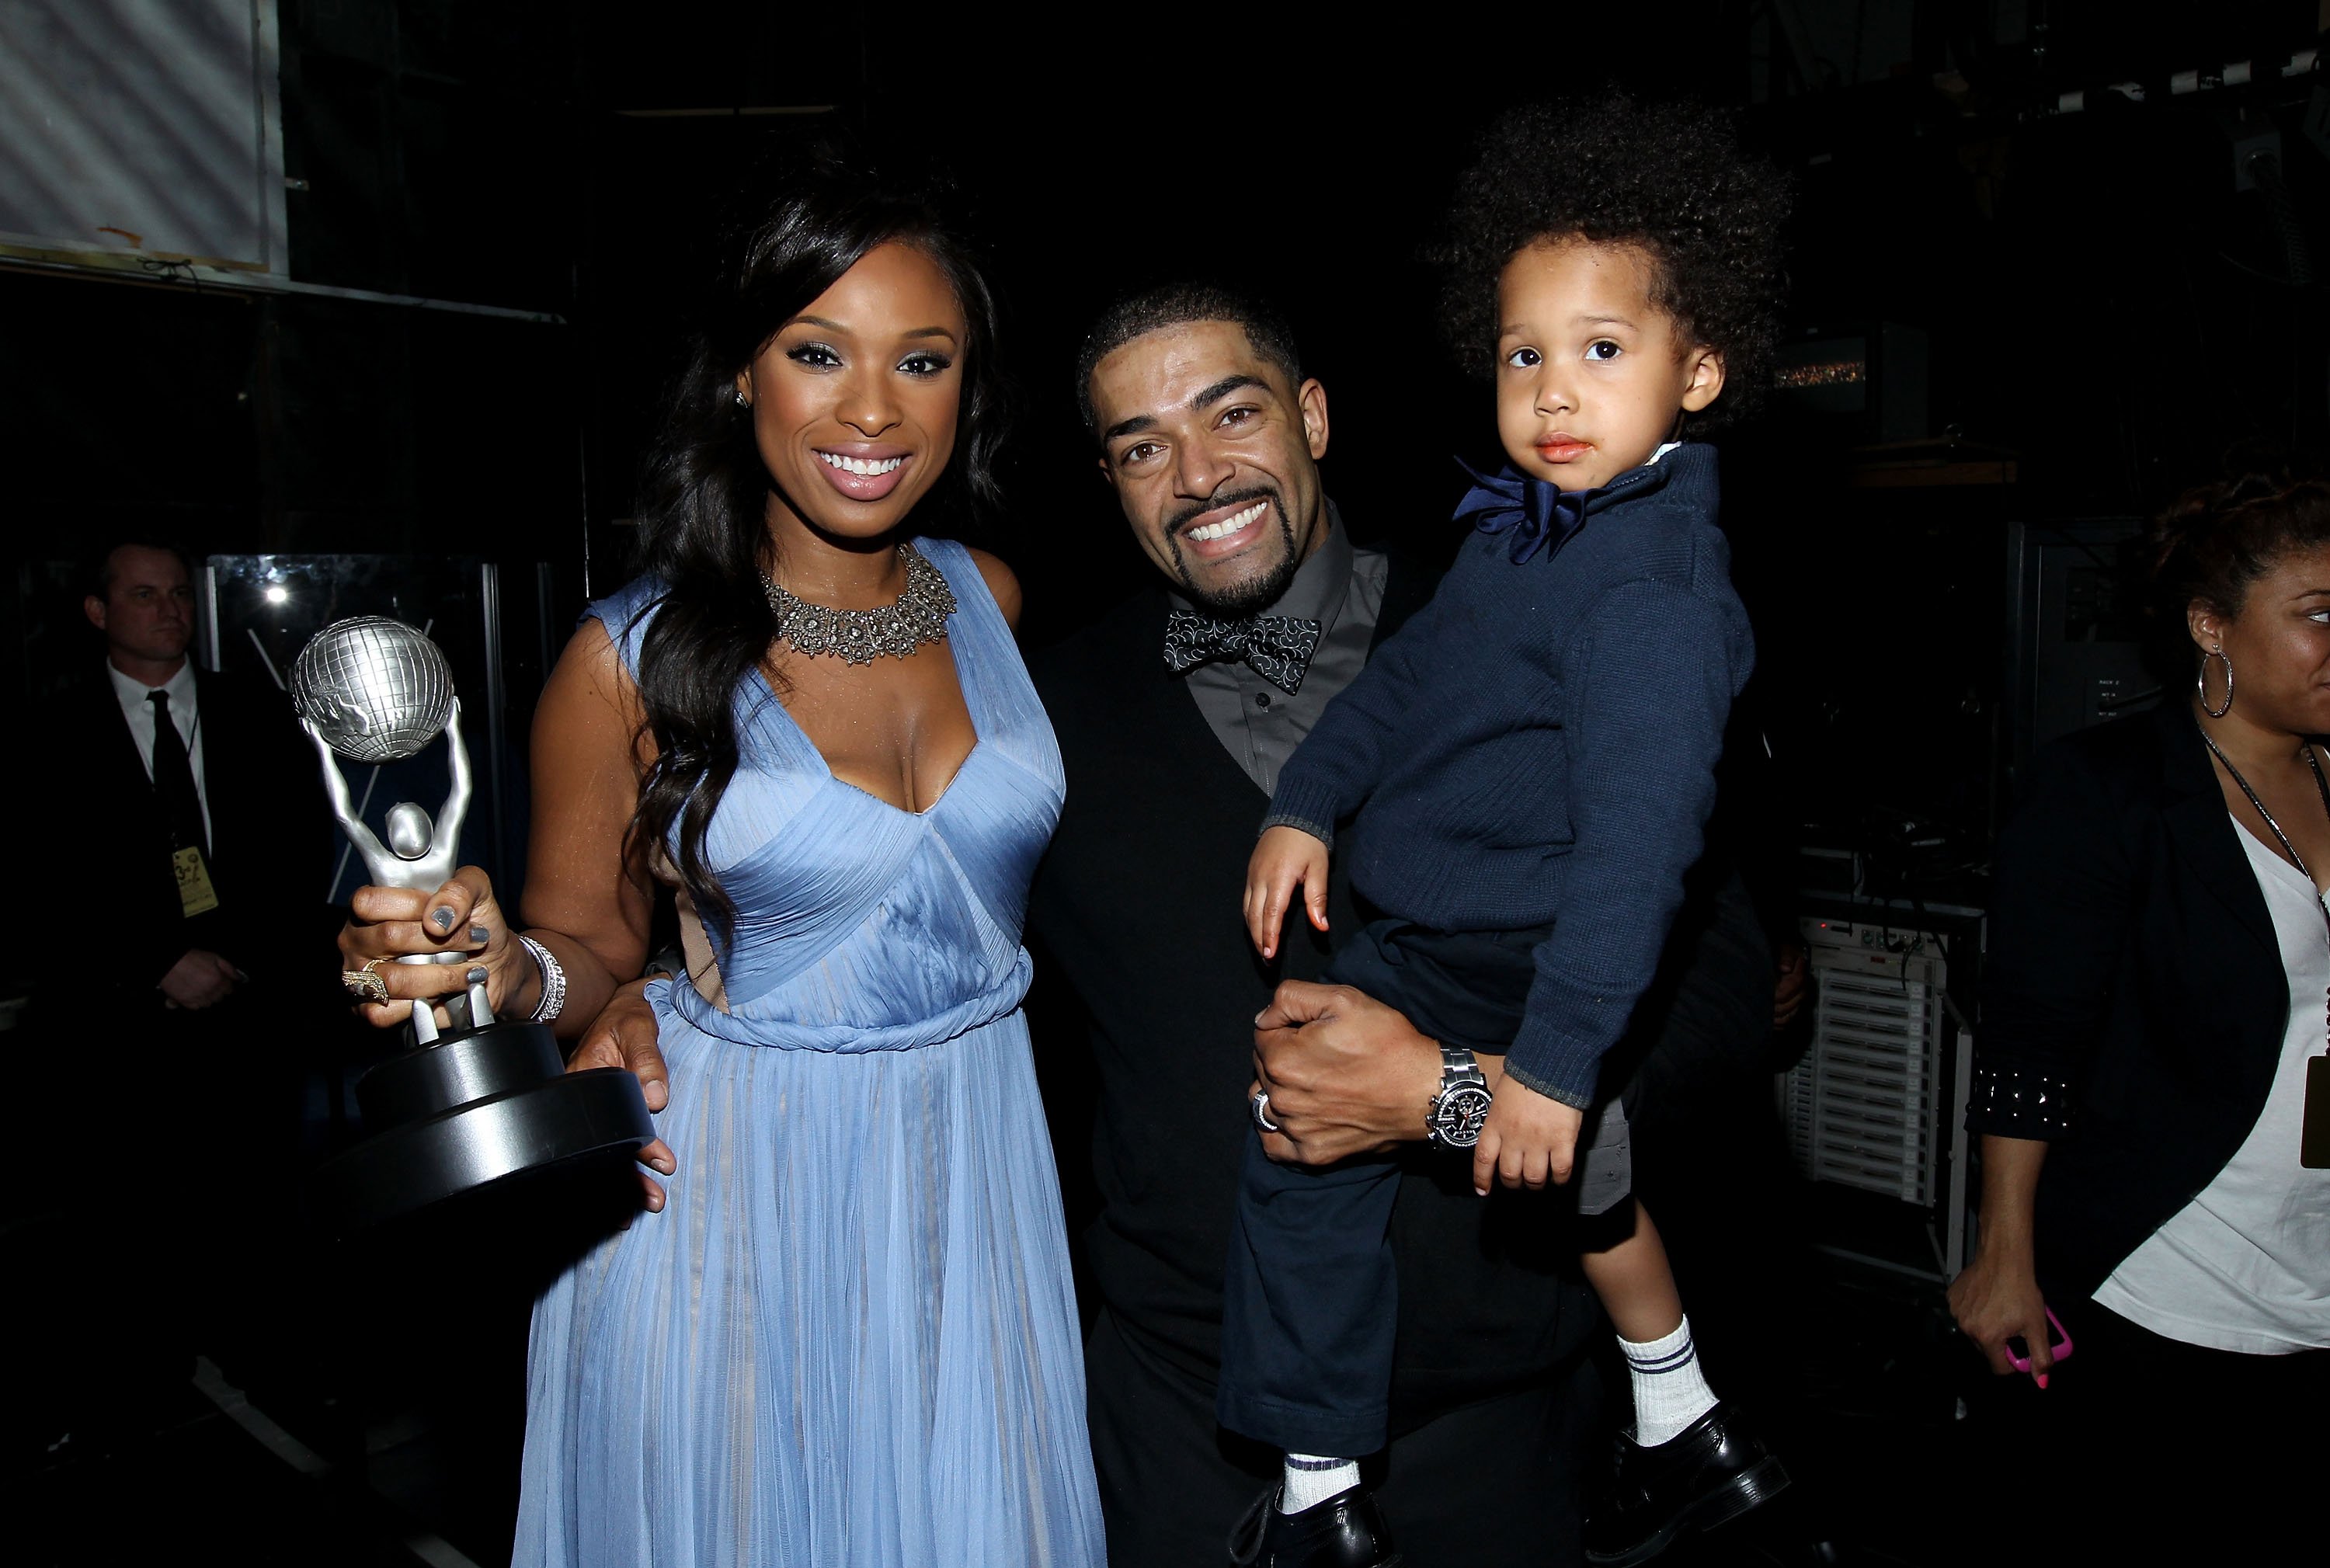 Jennifer Hudson, David Otunga, and their son David Daniel Otunga Jr. at the 43rd NAACP Image Awards on February 17, 2012, in Los Angeles, California. | Source: Getty Images